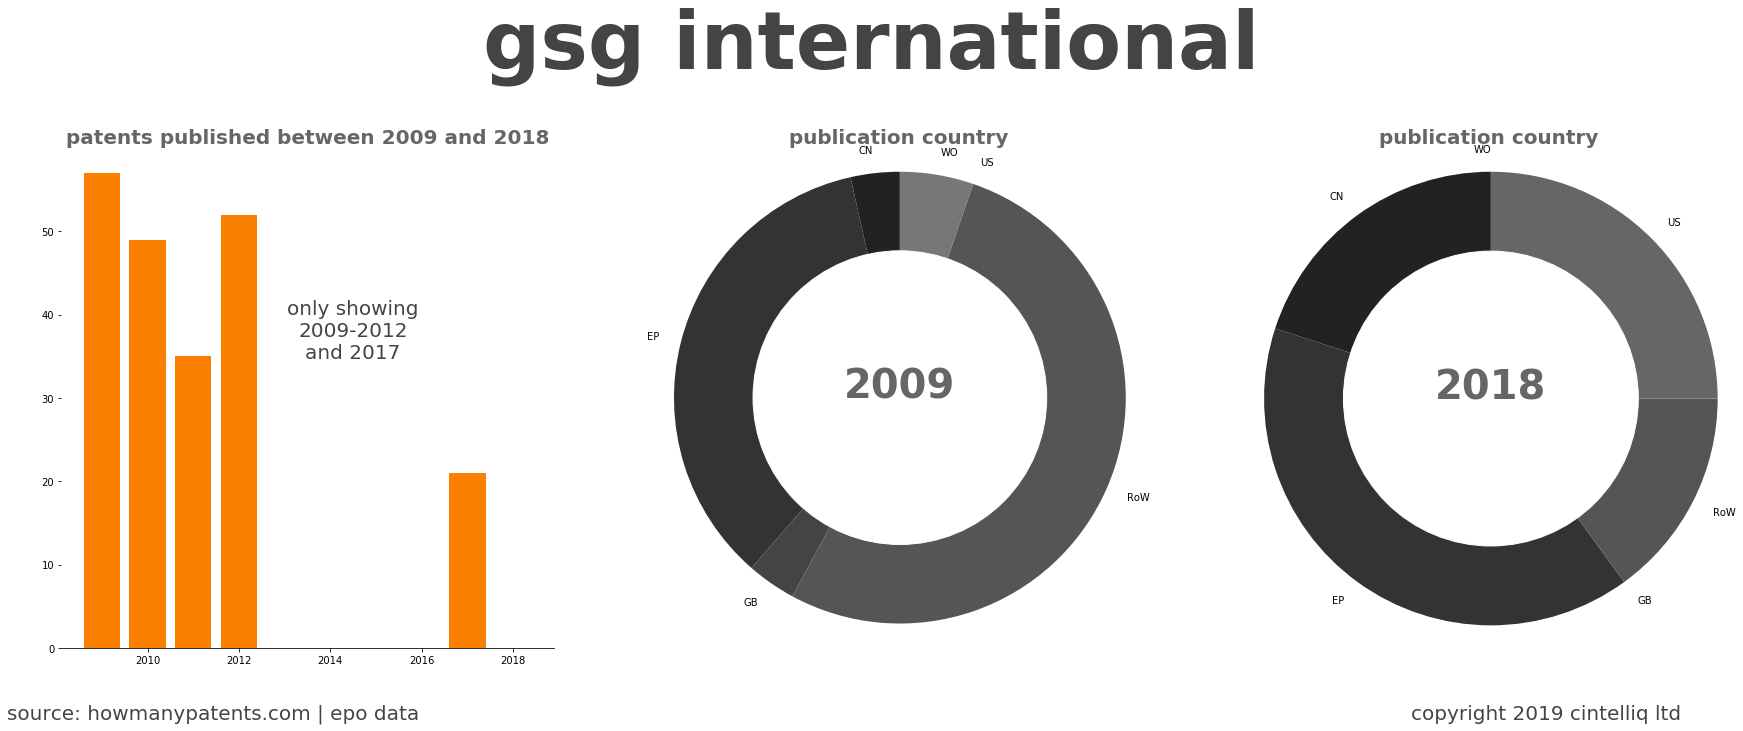 summary of patents for Gsg International